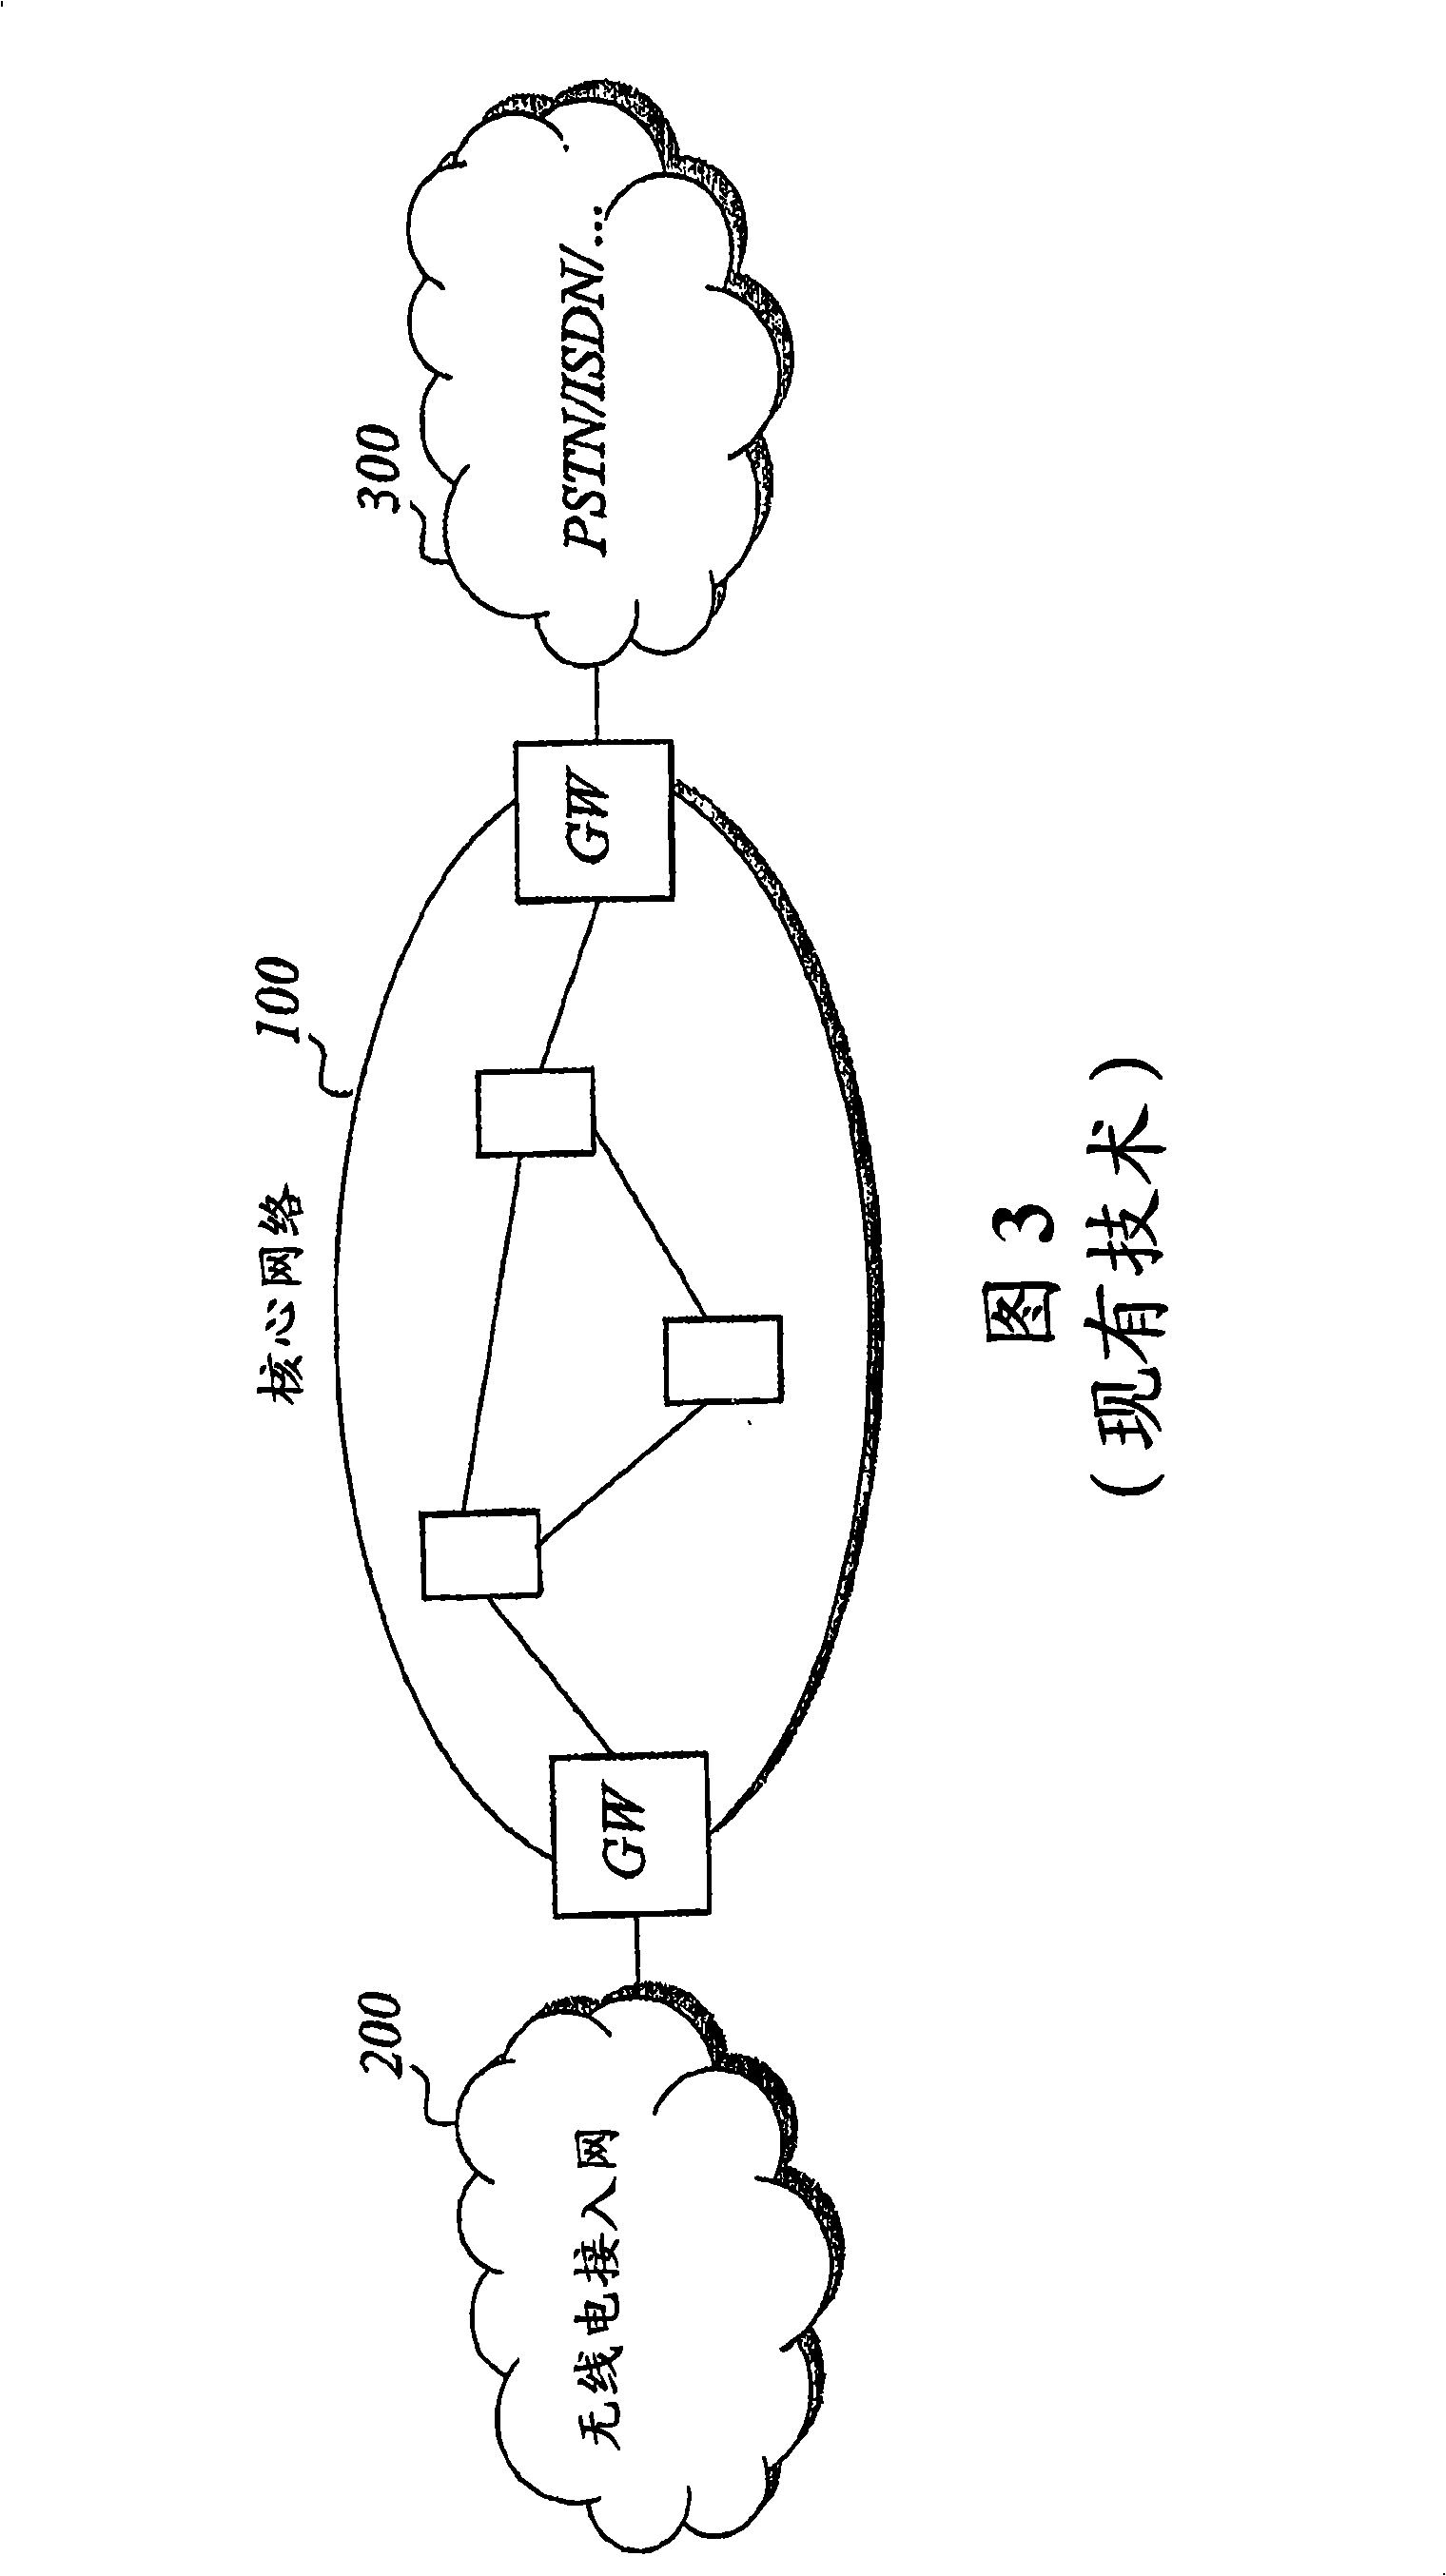 Method and test signal for measuring speech intelligibility